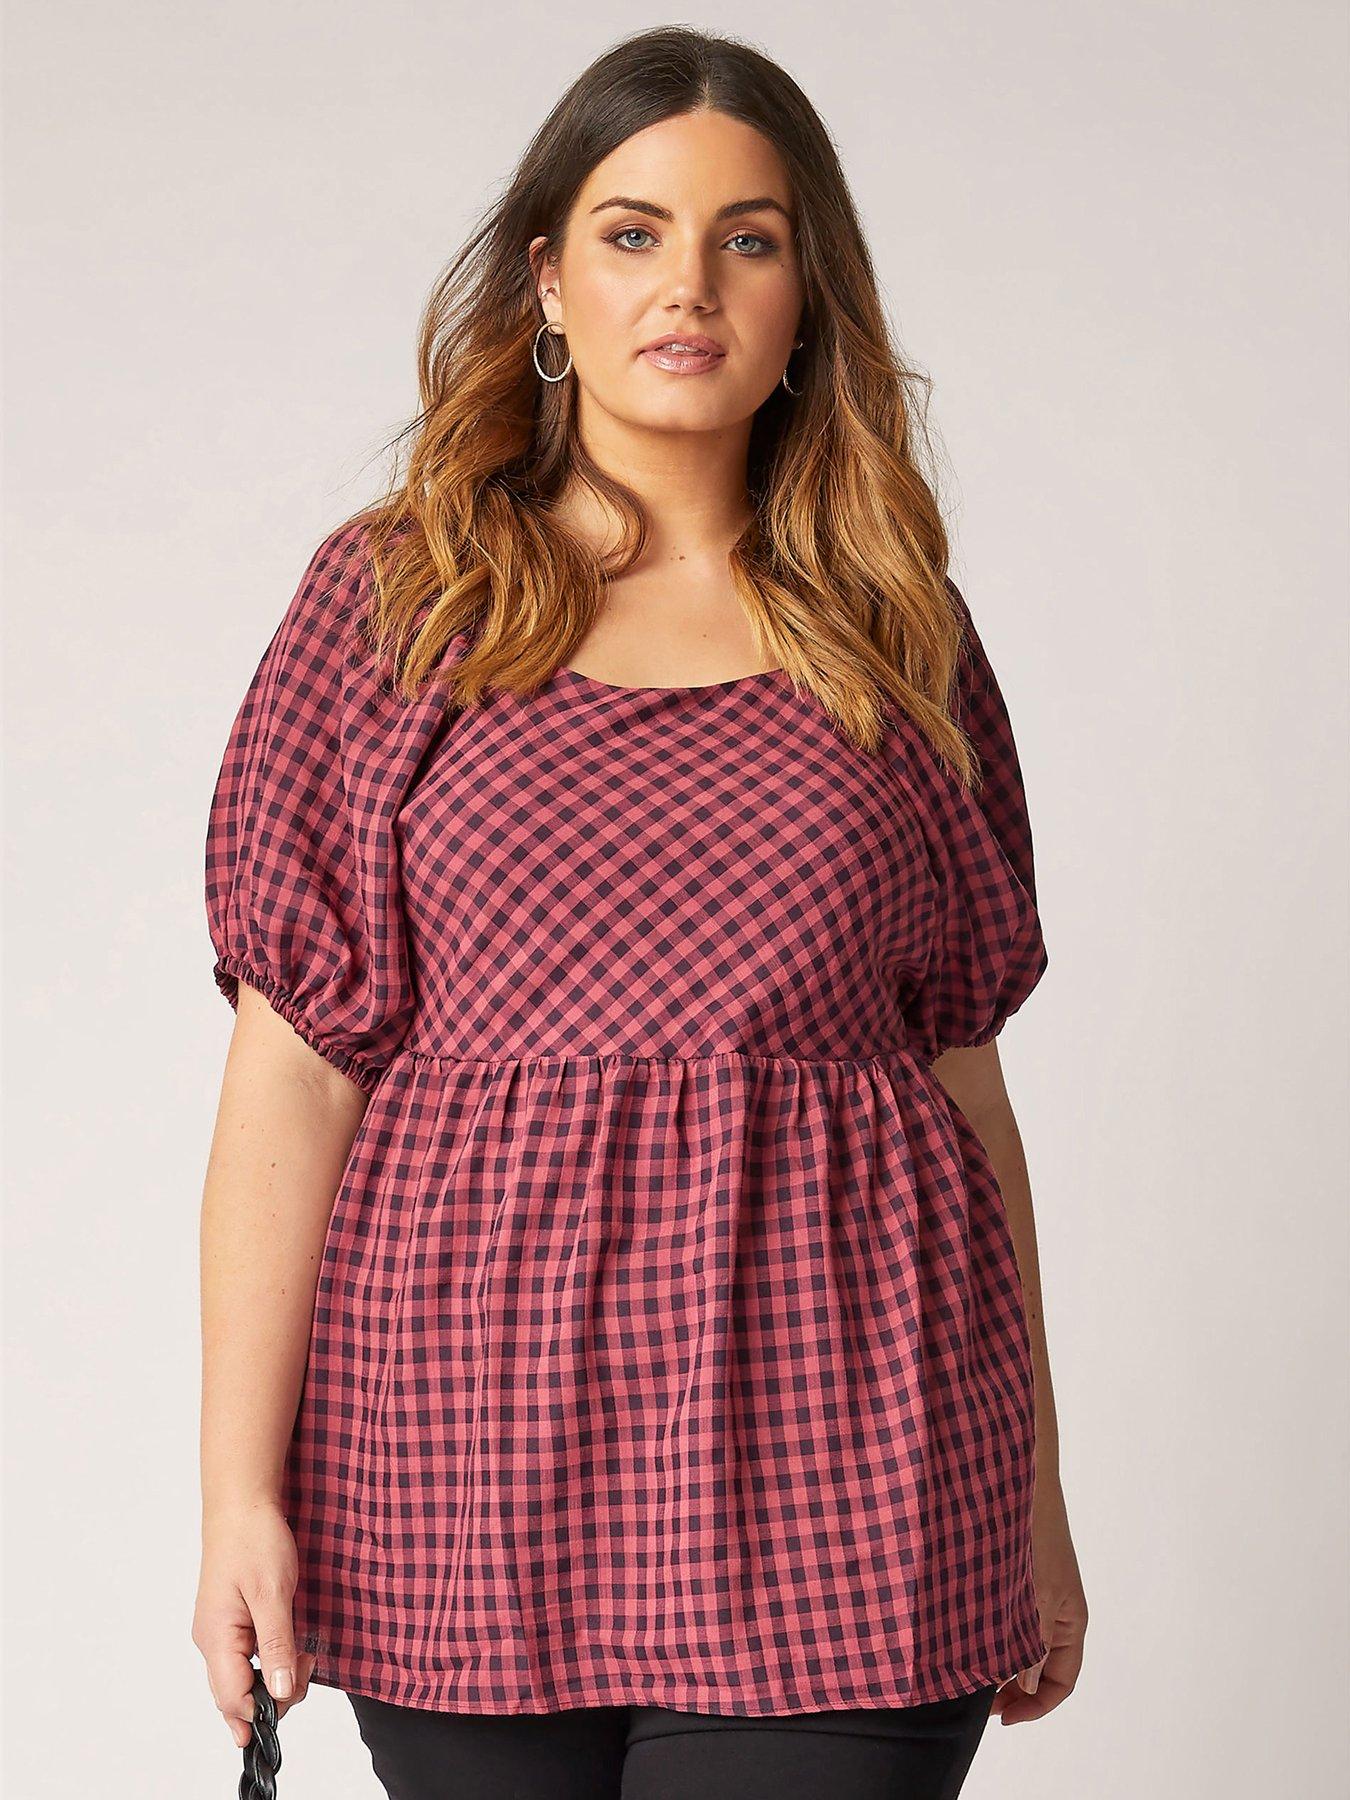 Blouses & shirts Unfiltered Square Neck Peplum Pink Gingham